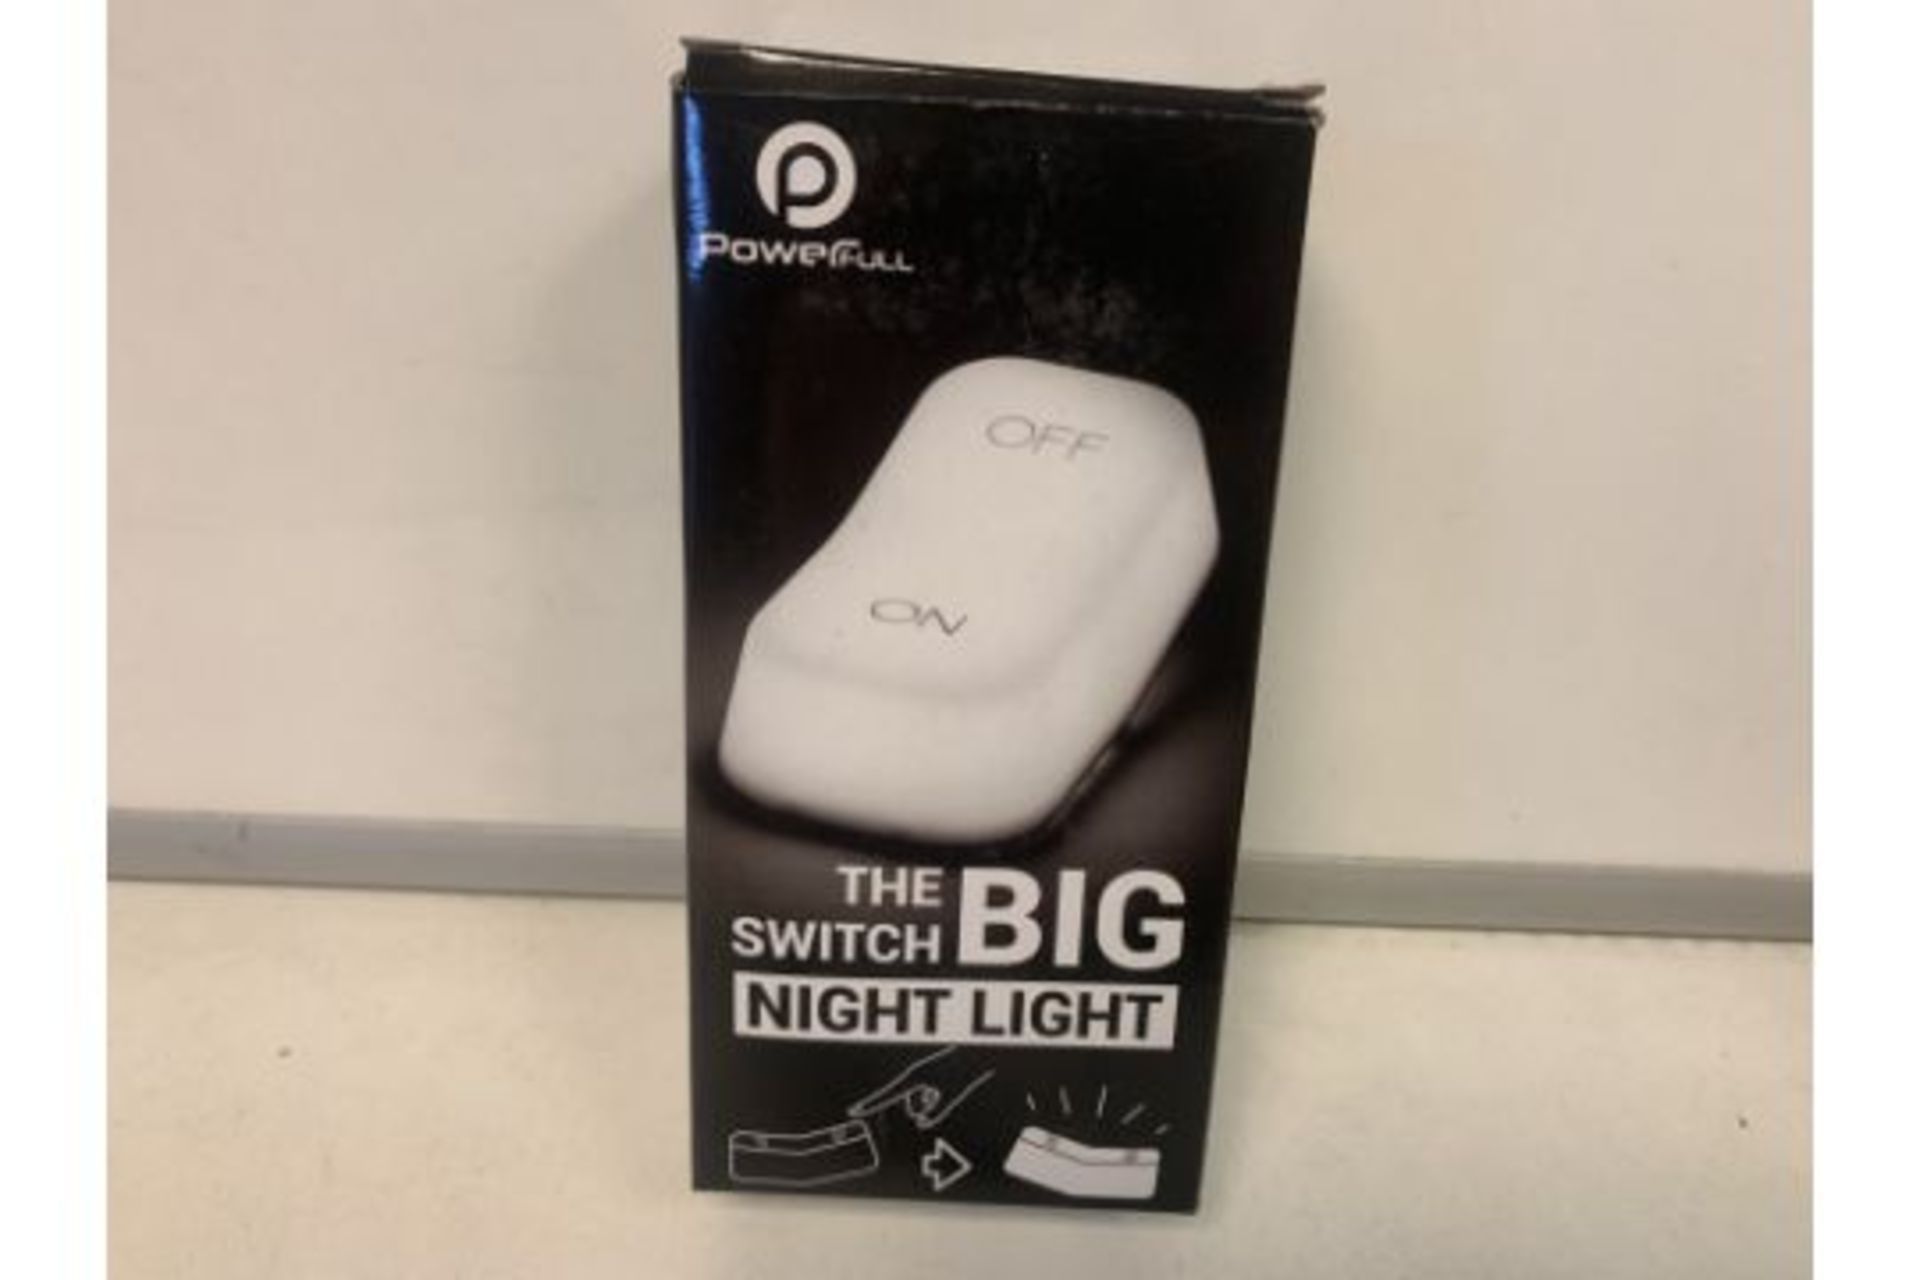 20 X NEW BOXED POWERFULL THE BIG SWITCH NIGHT LIGHTS. RRP £12.99 EACH